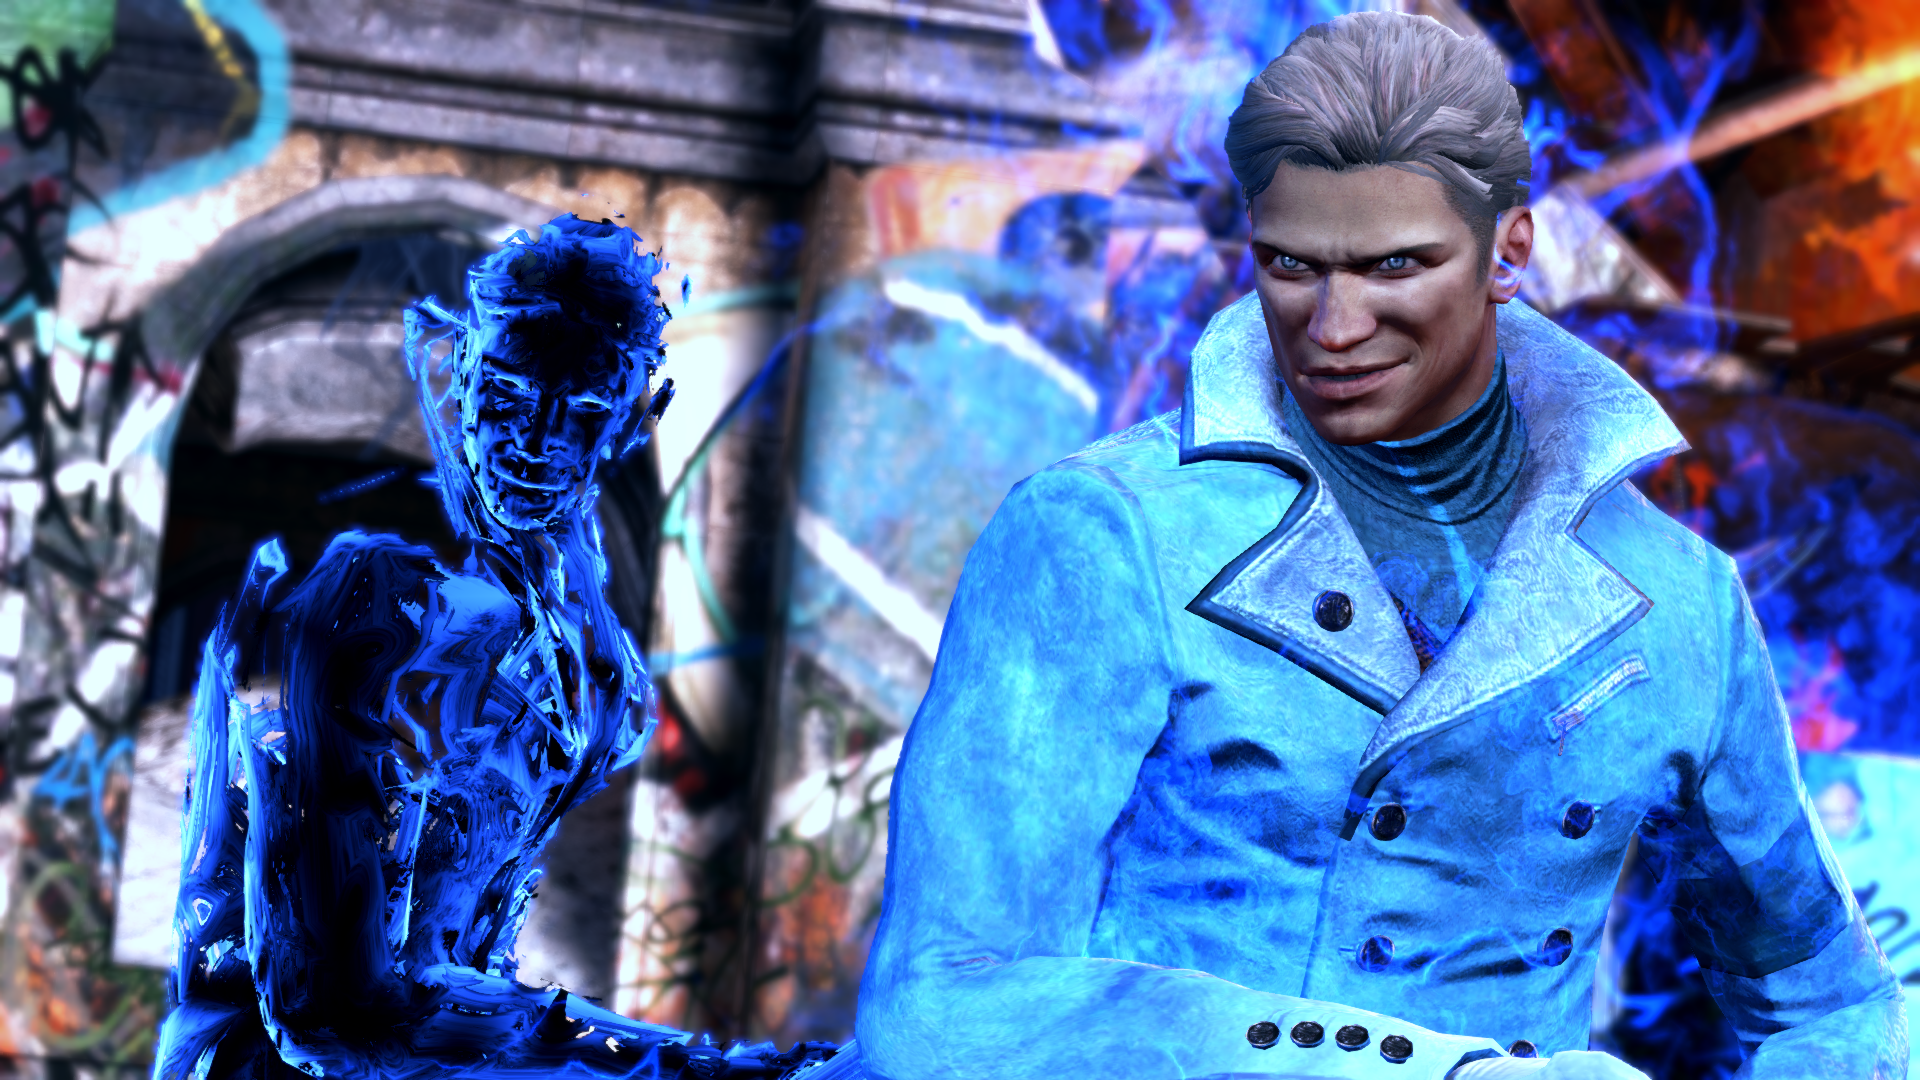 DmC: Devil May Cry: The Chronicles of Vergil, Devil May Cry Wiki